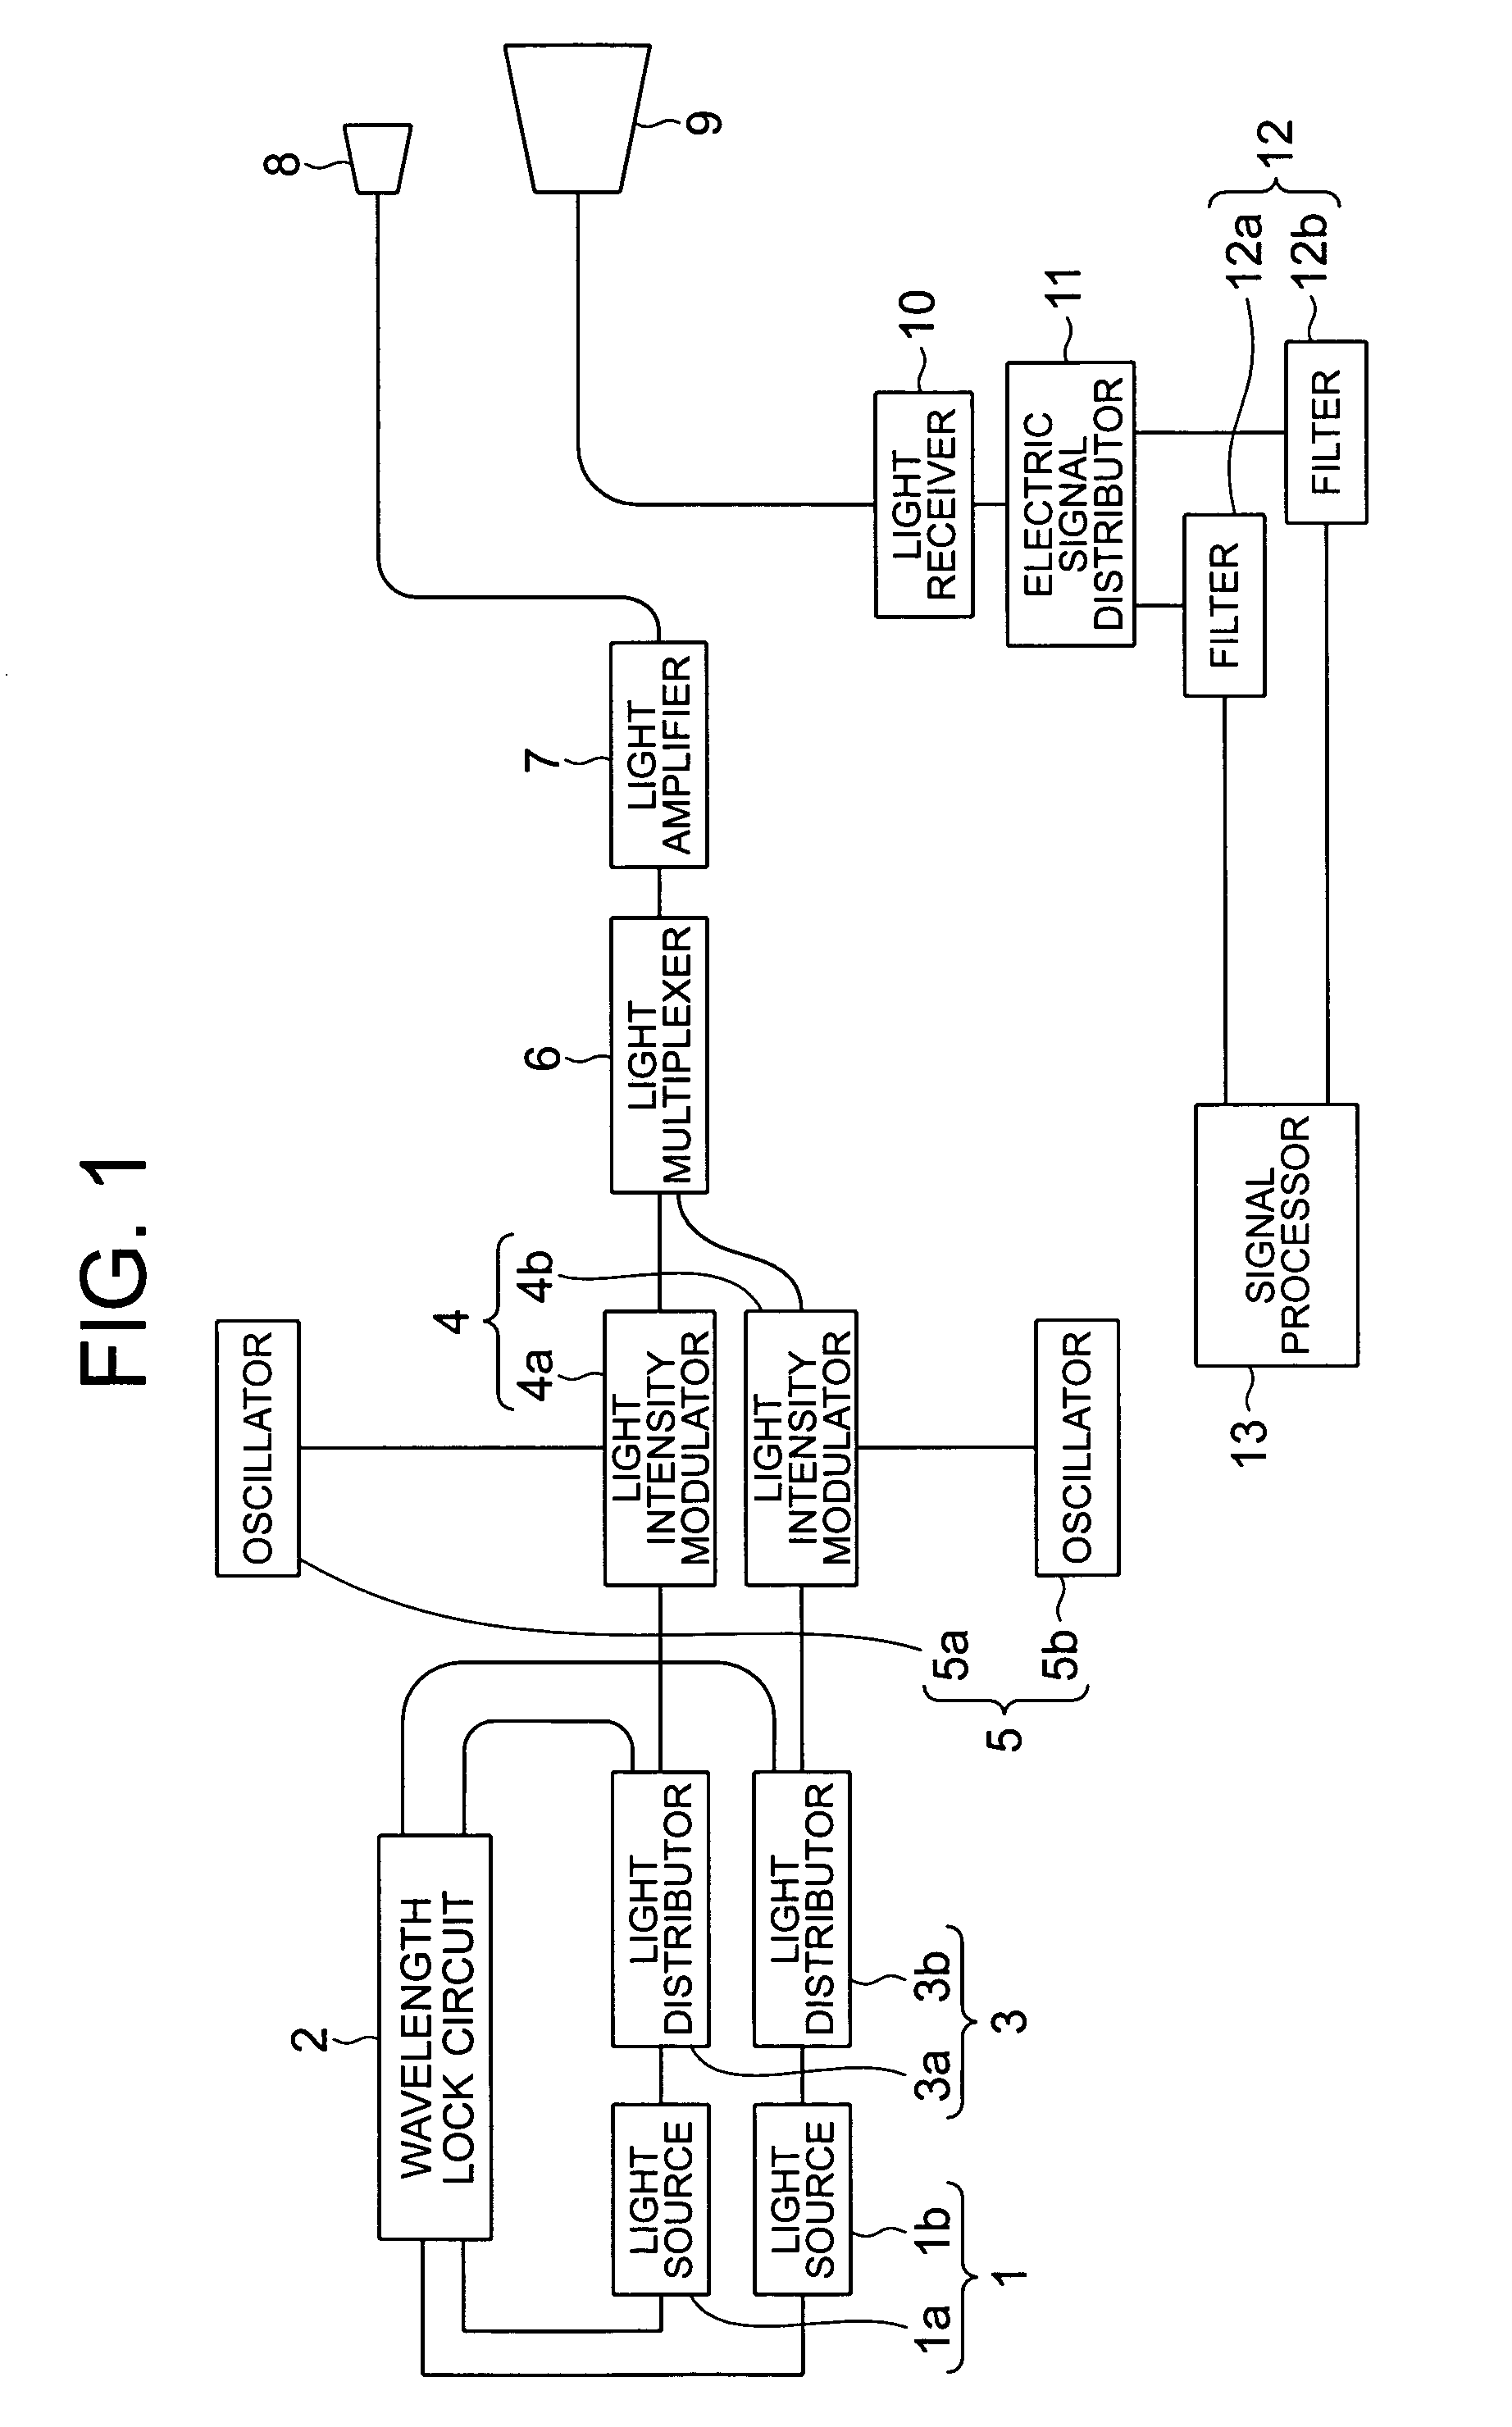 Differential absorption lidar apparatus having multiplexed light signals with two wavelengths in a predetermined beam size and beam shape